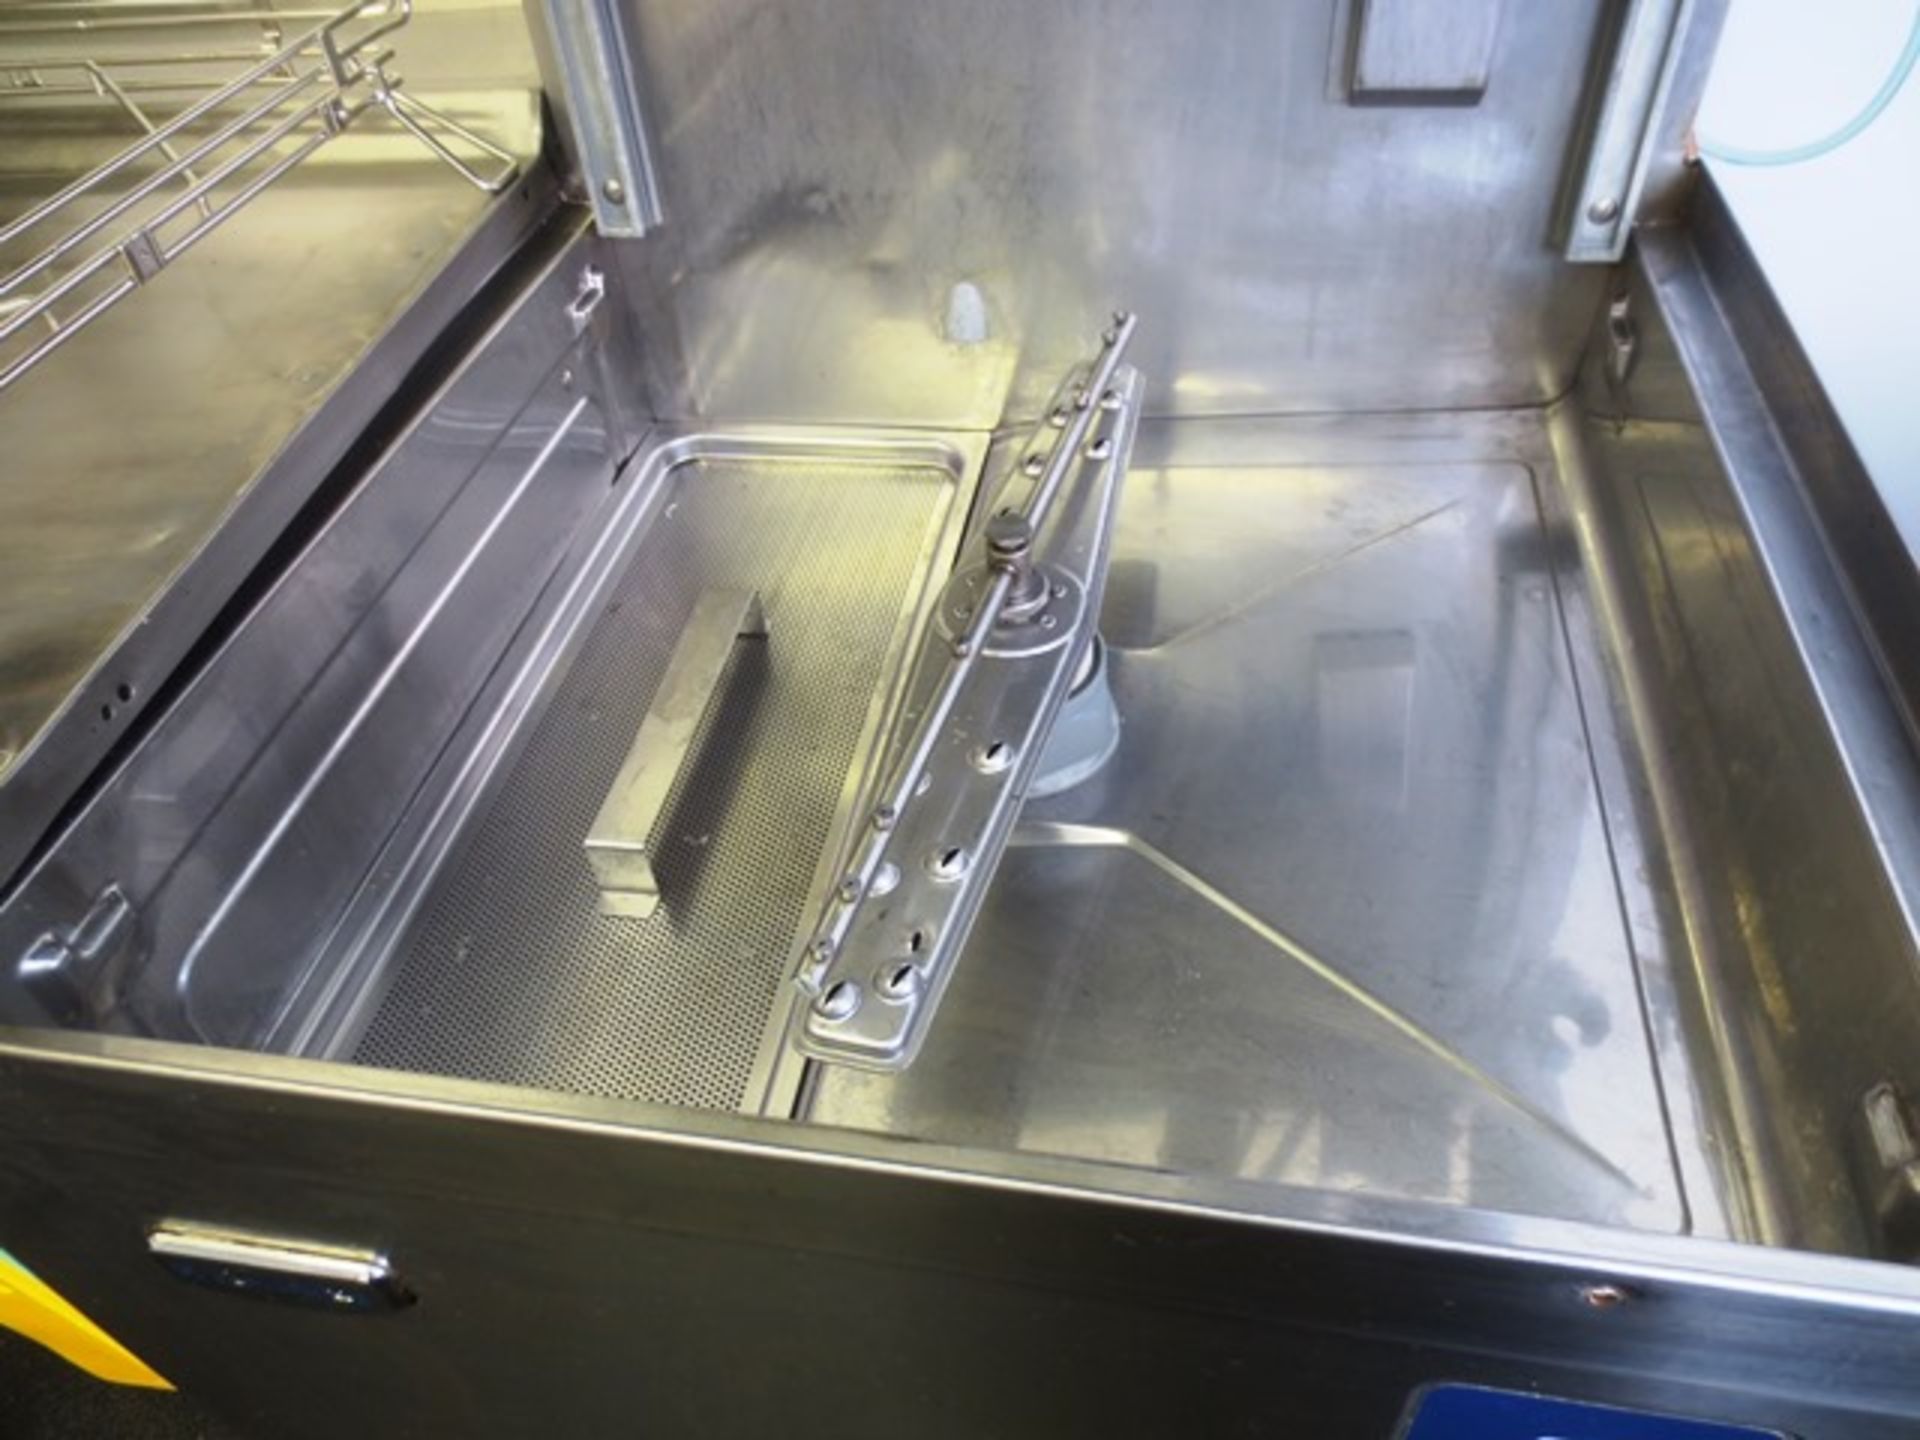 Electrolux stainless steel commercial dishwasher, model: WT55ADG1, serial no: 73100024 (2007) (3 - Image 4 of 4